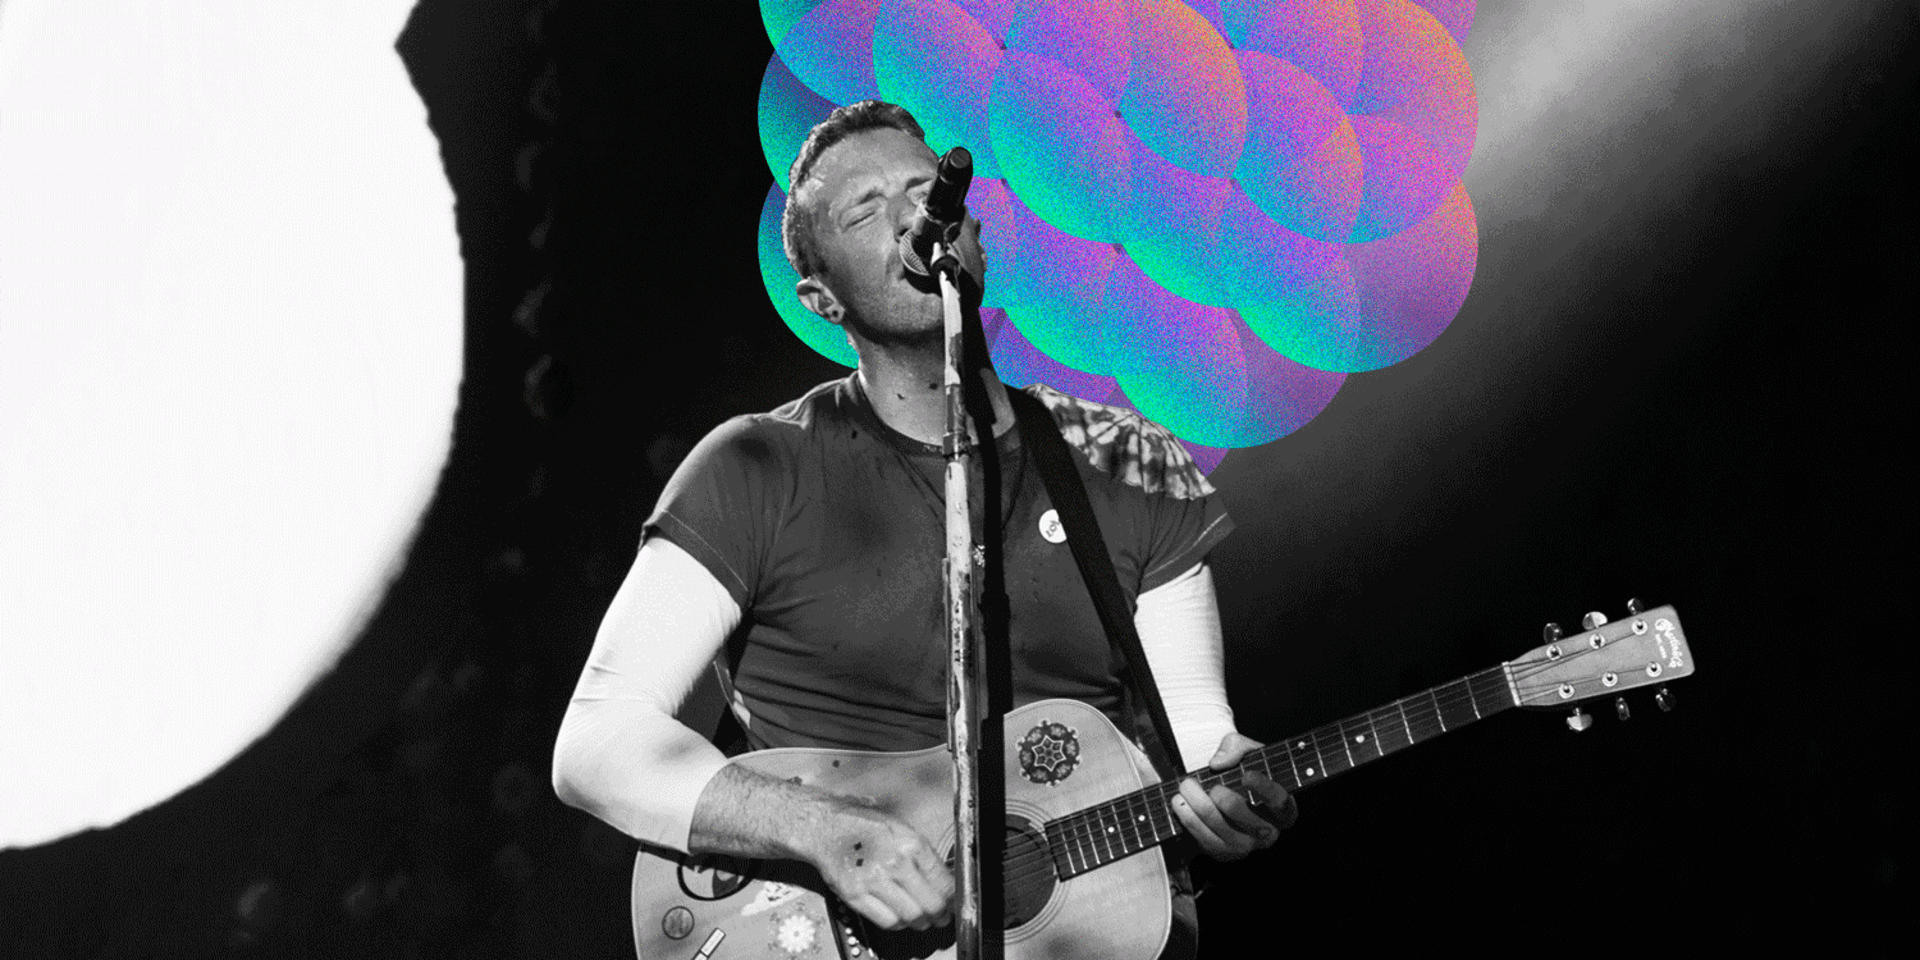 Coldplay's A Head Full of Dreams Asian Tour, as told by Filipino fans